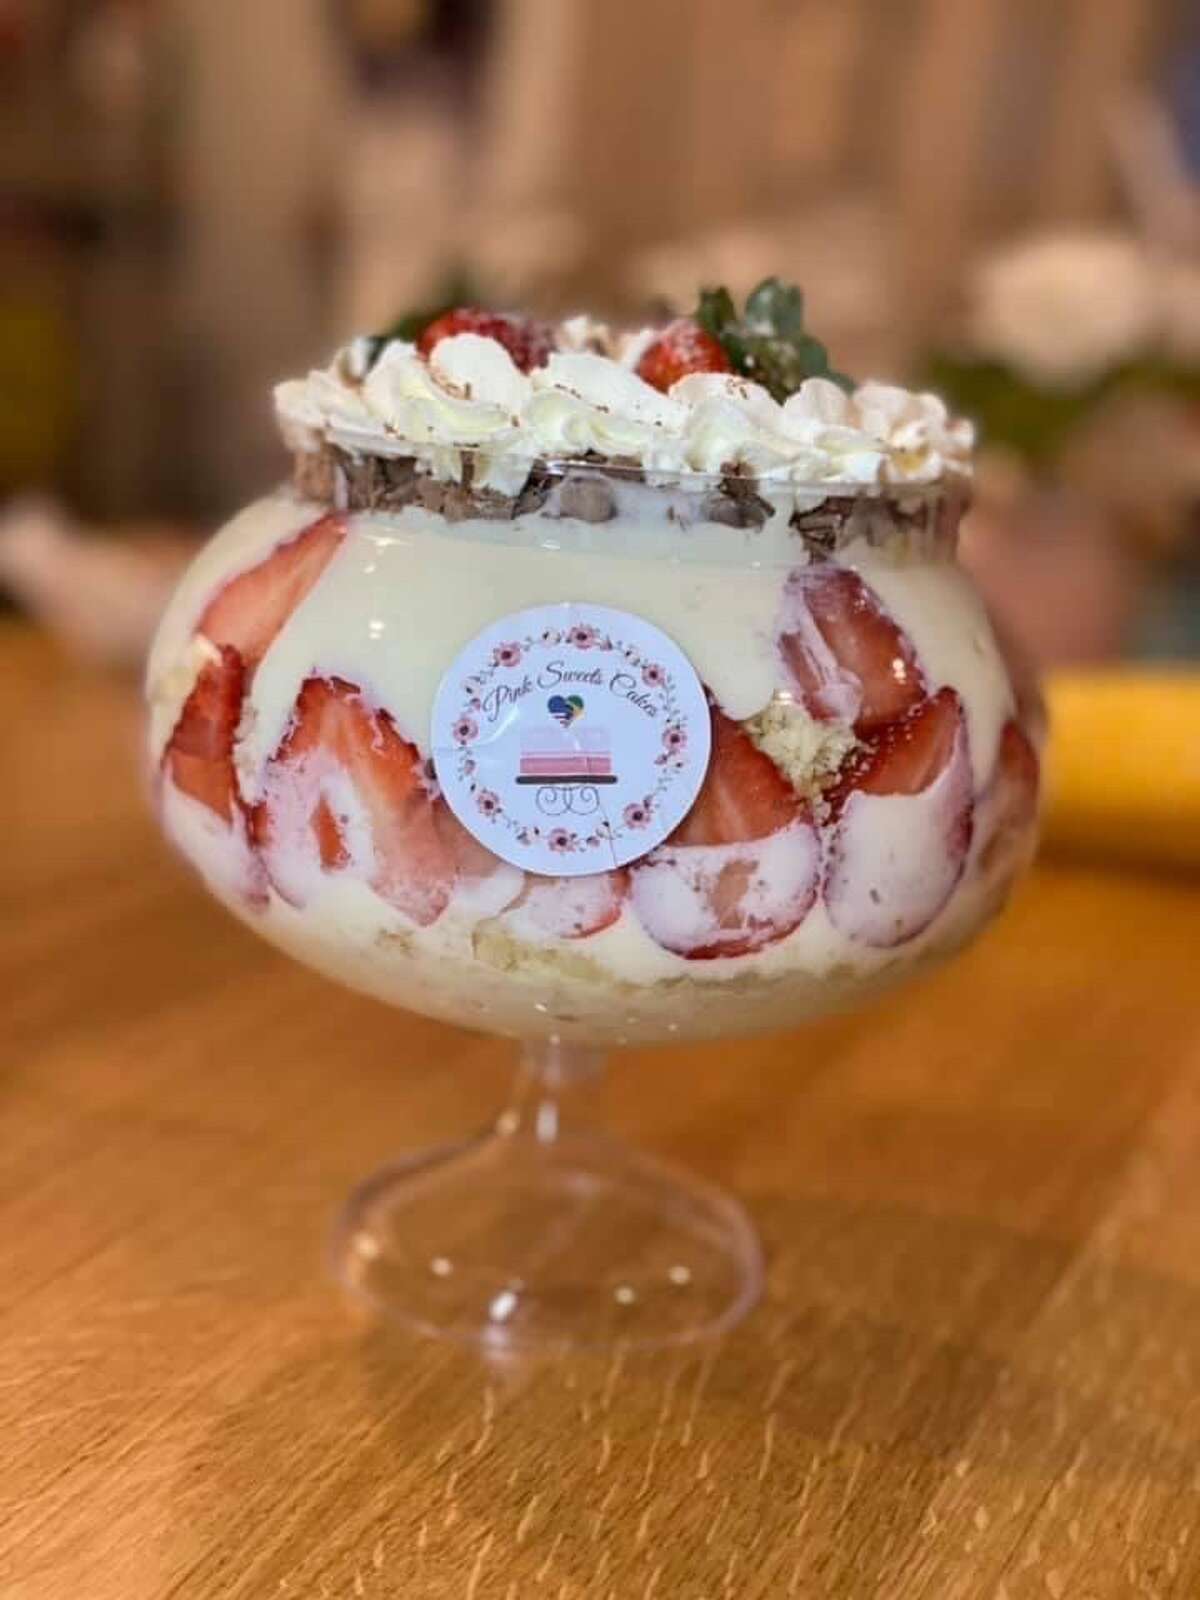 Trifle bowl from Pink Sweet Cakes located at the Stamford Town Center.